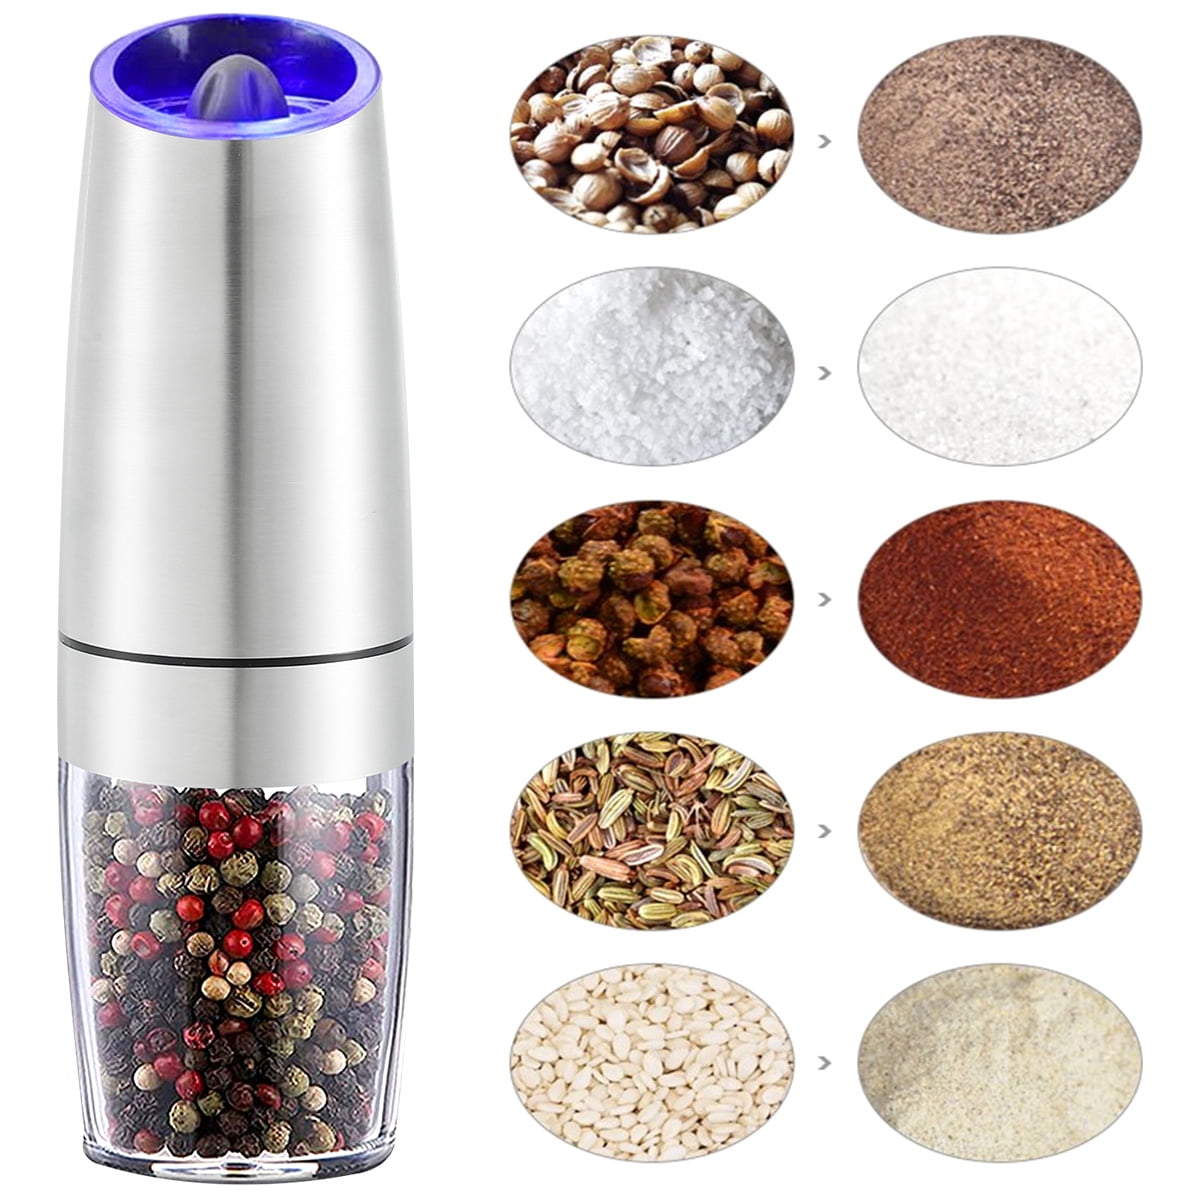 Kyoffiie Electric Pepper and Salt Grinders Automatic Gravity Sensor Pepper Mill Kitchen Tools for Home, Size: 20*5.2cm/7.9x2inch, Silver